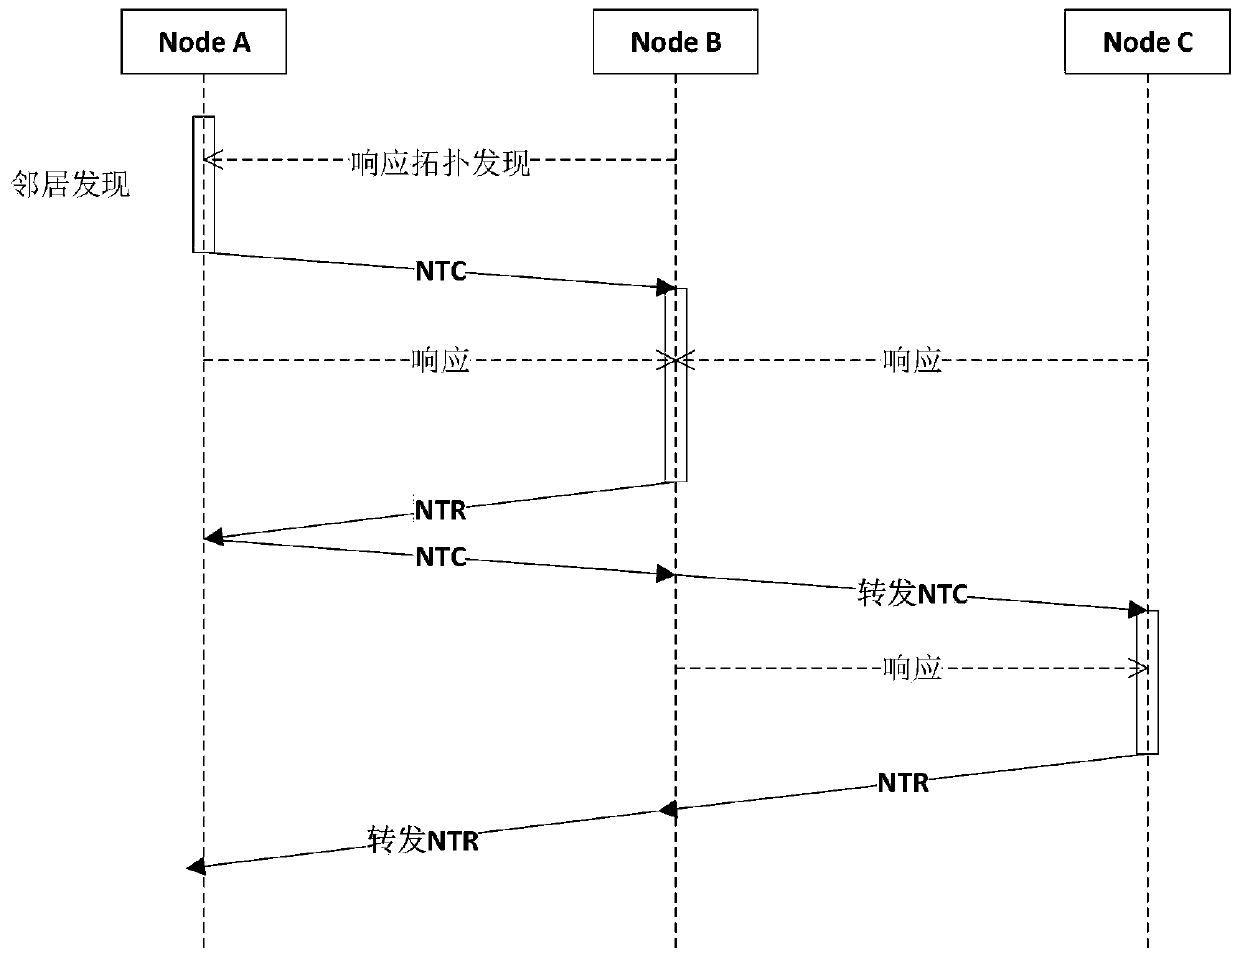 Wireless network topology discovery method combining neighbor discovery and breadth-first algorithm